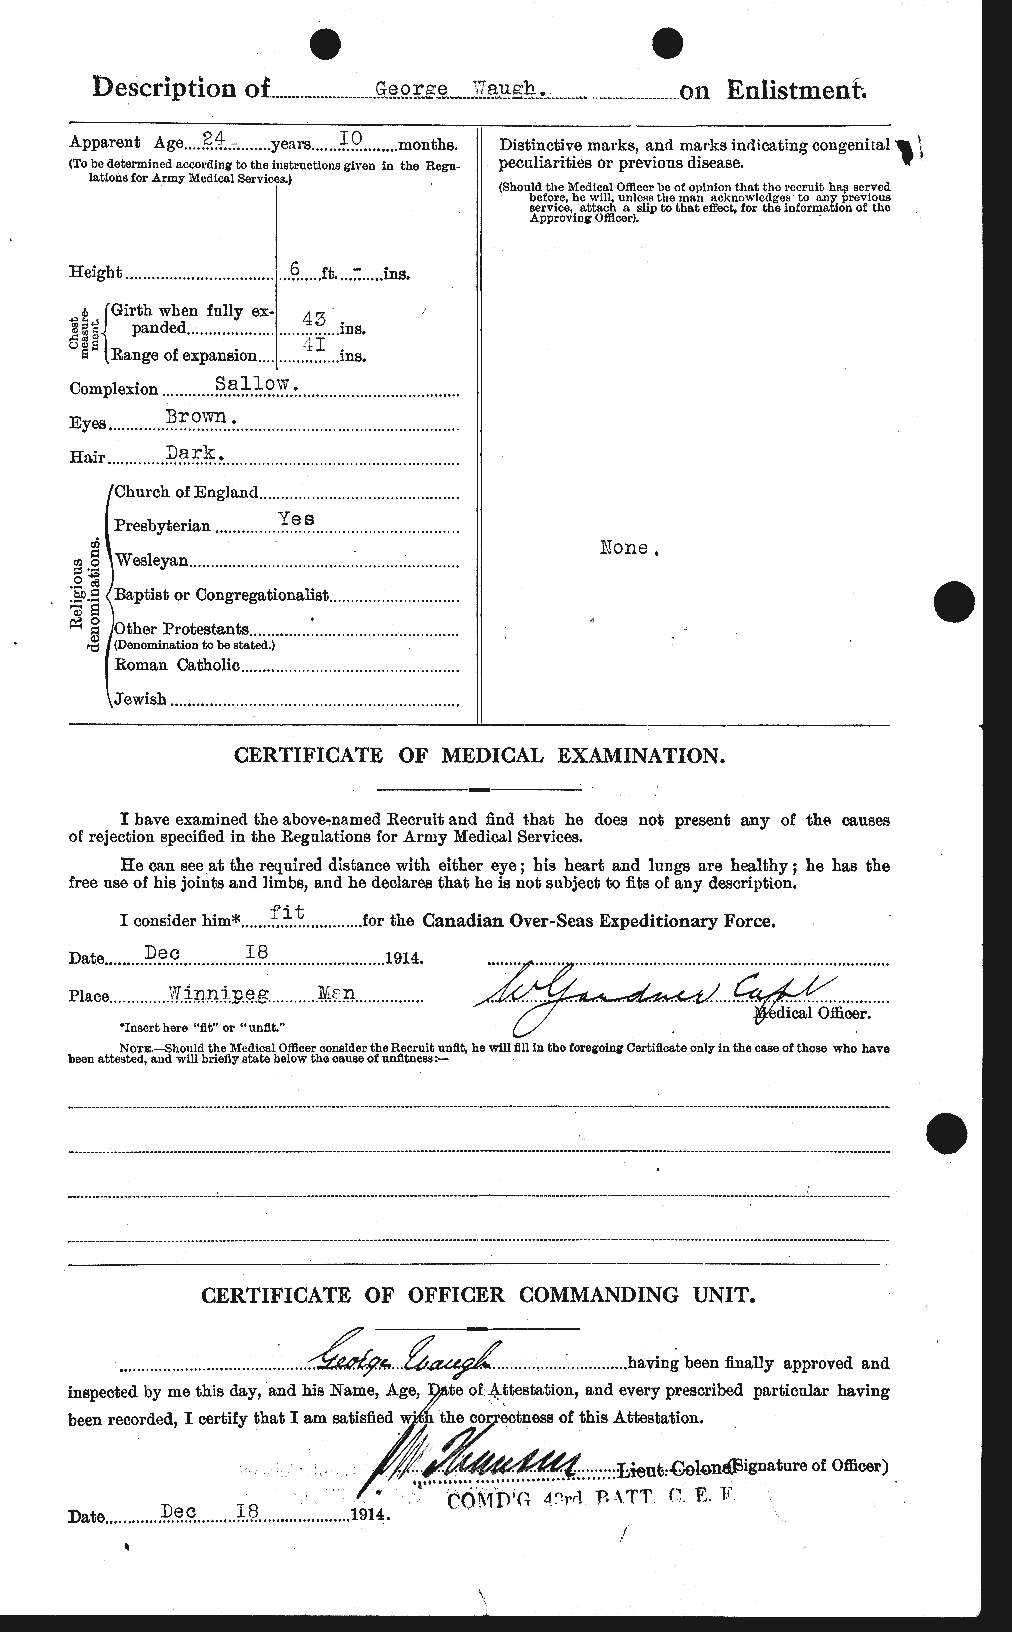 Personnel Records of the First World War - CEF 662991b